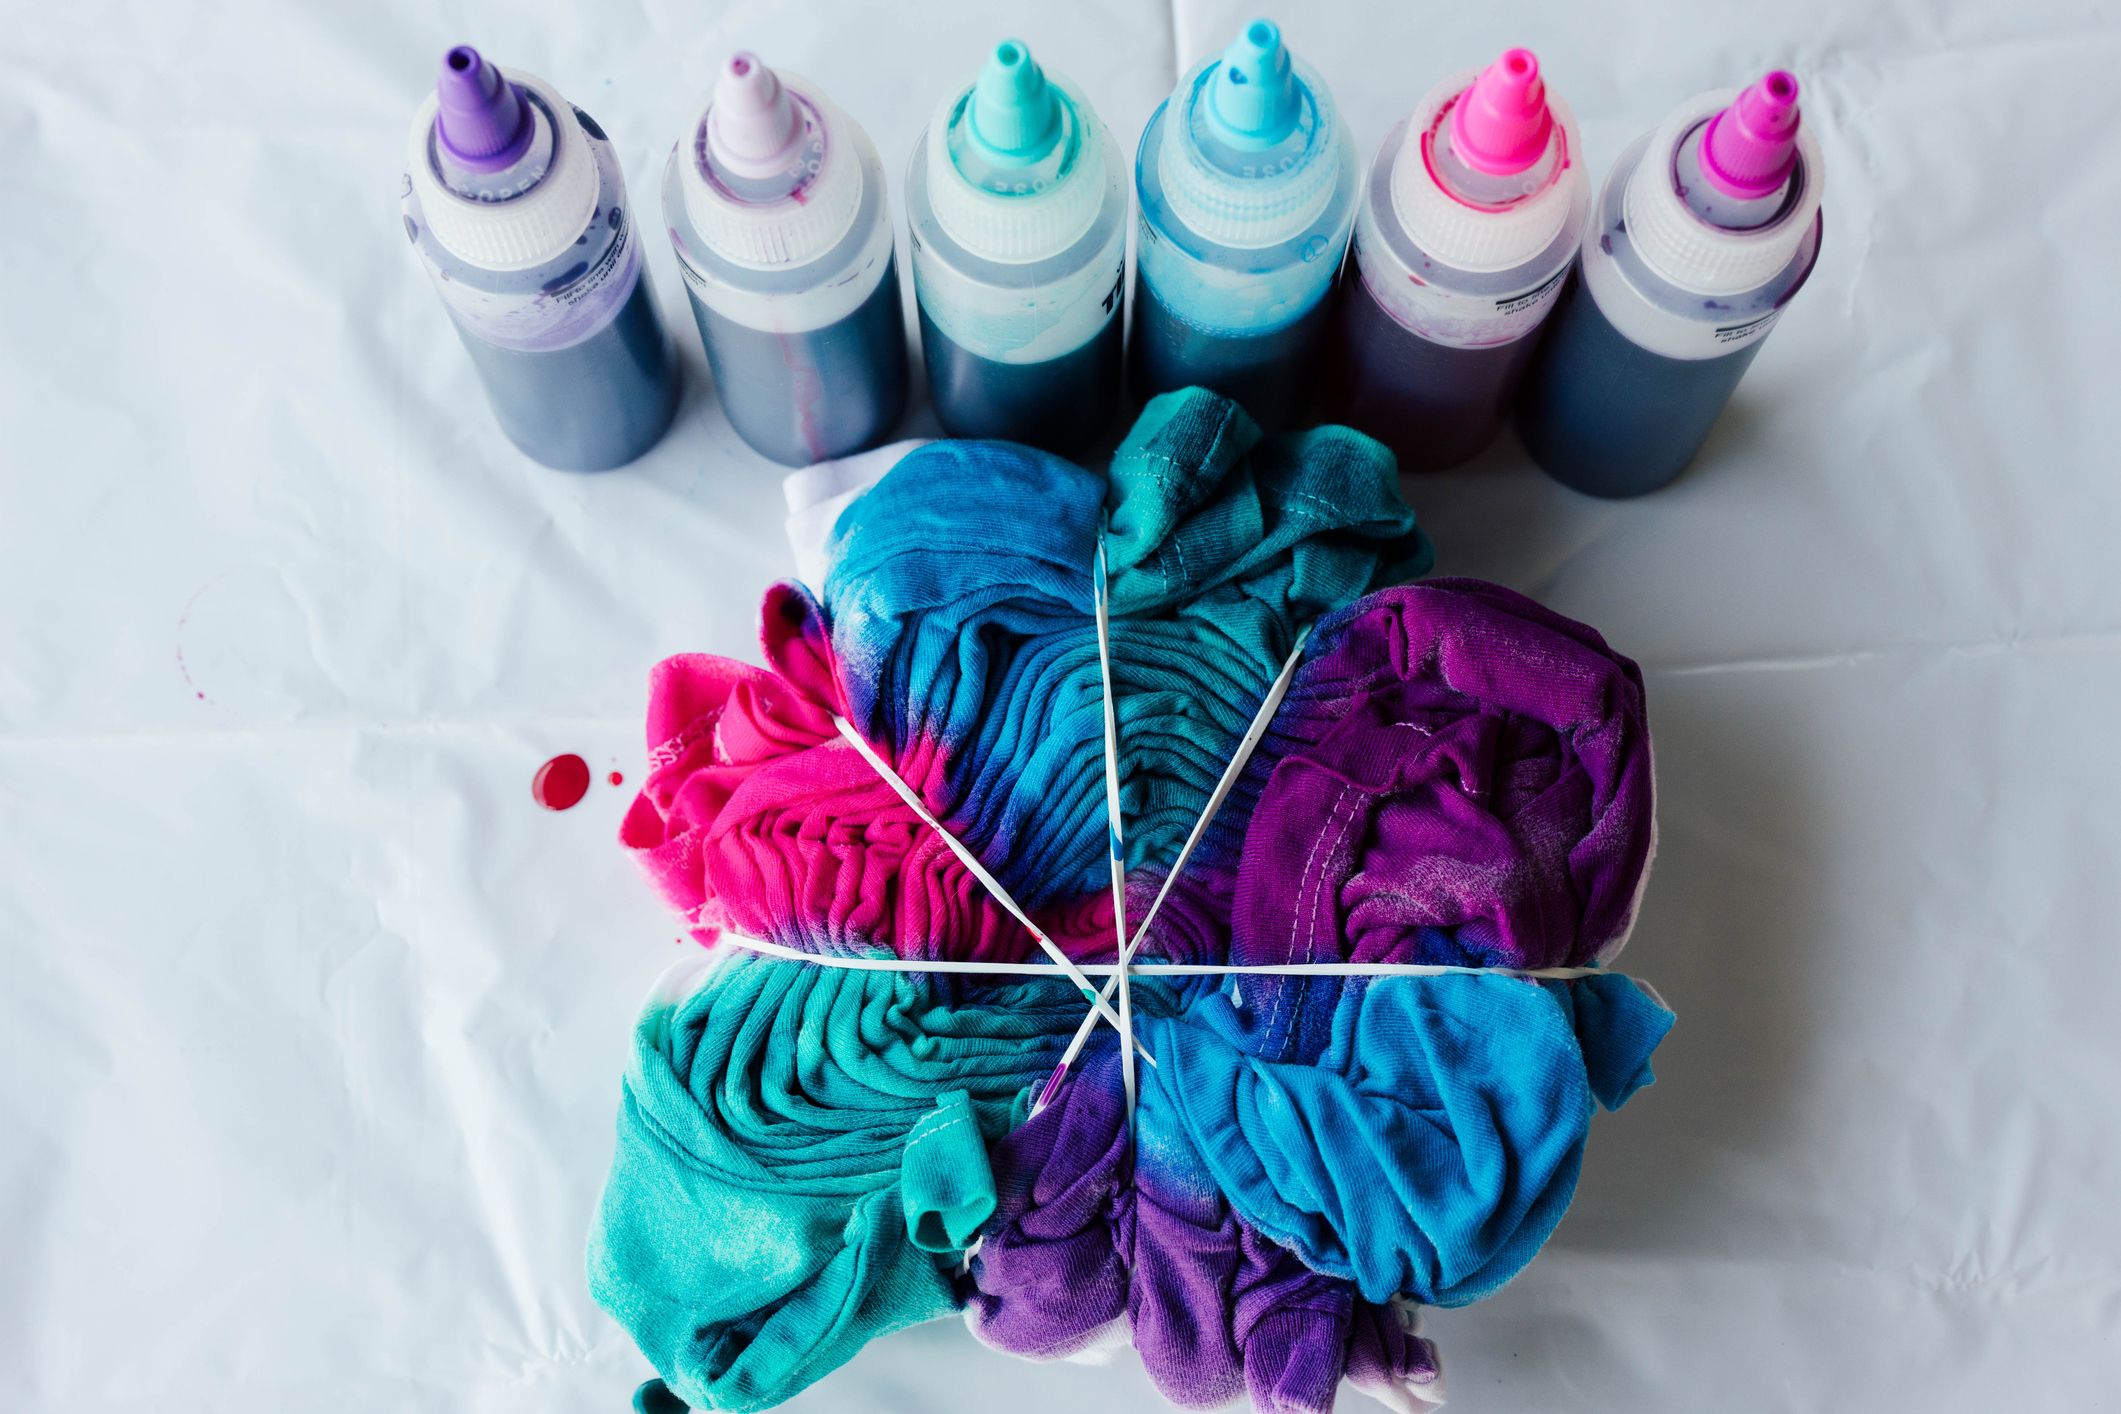 How to Prep, Wash & Care for Tie Dye